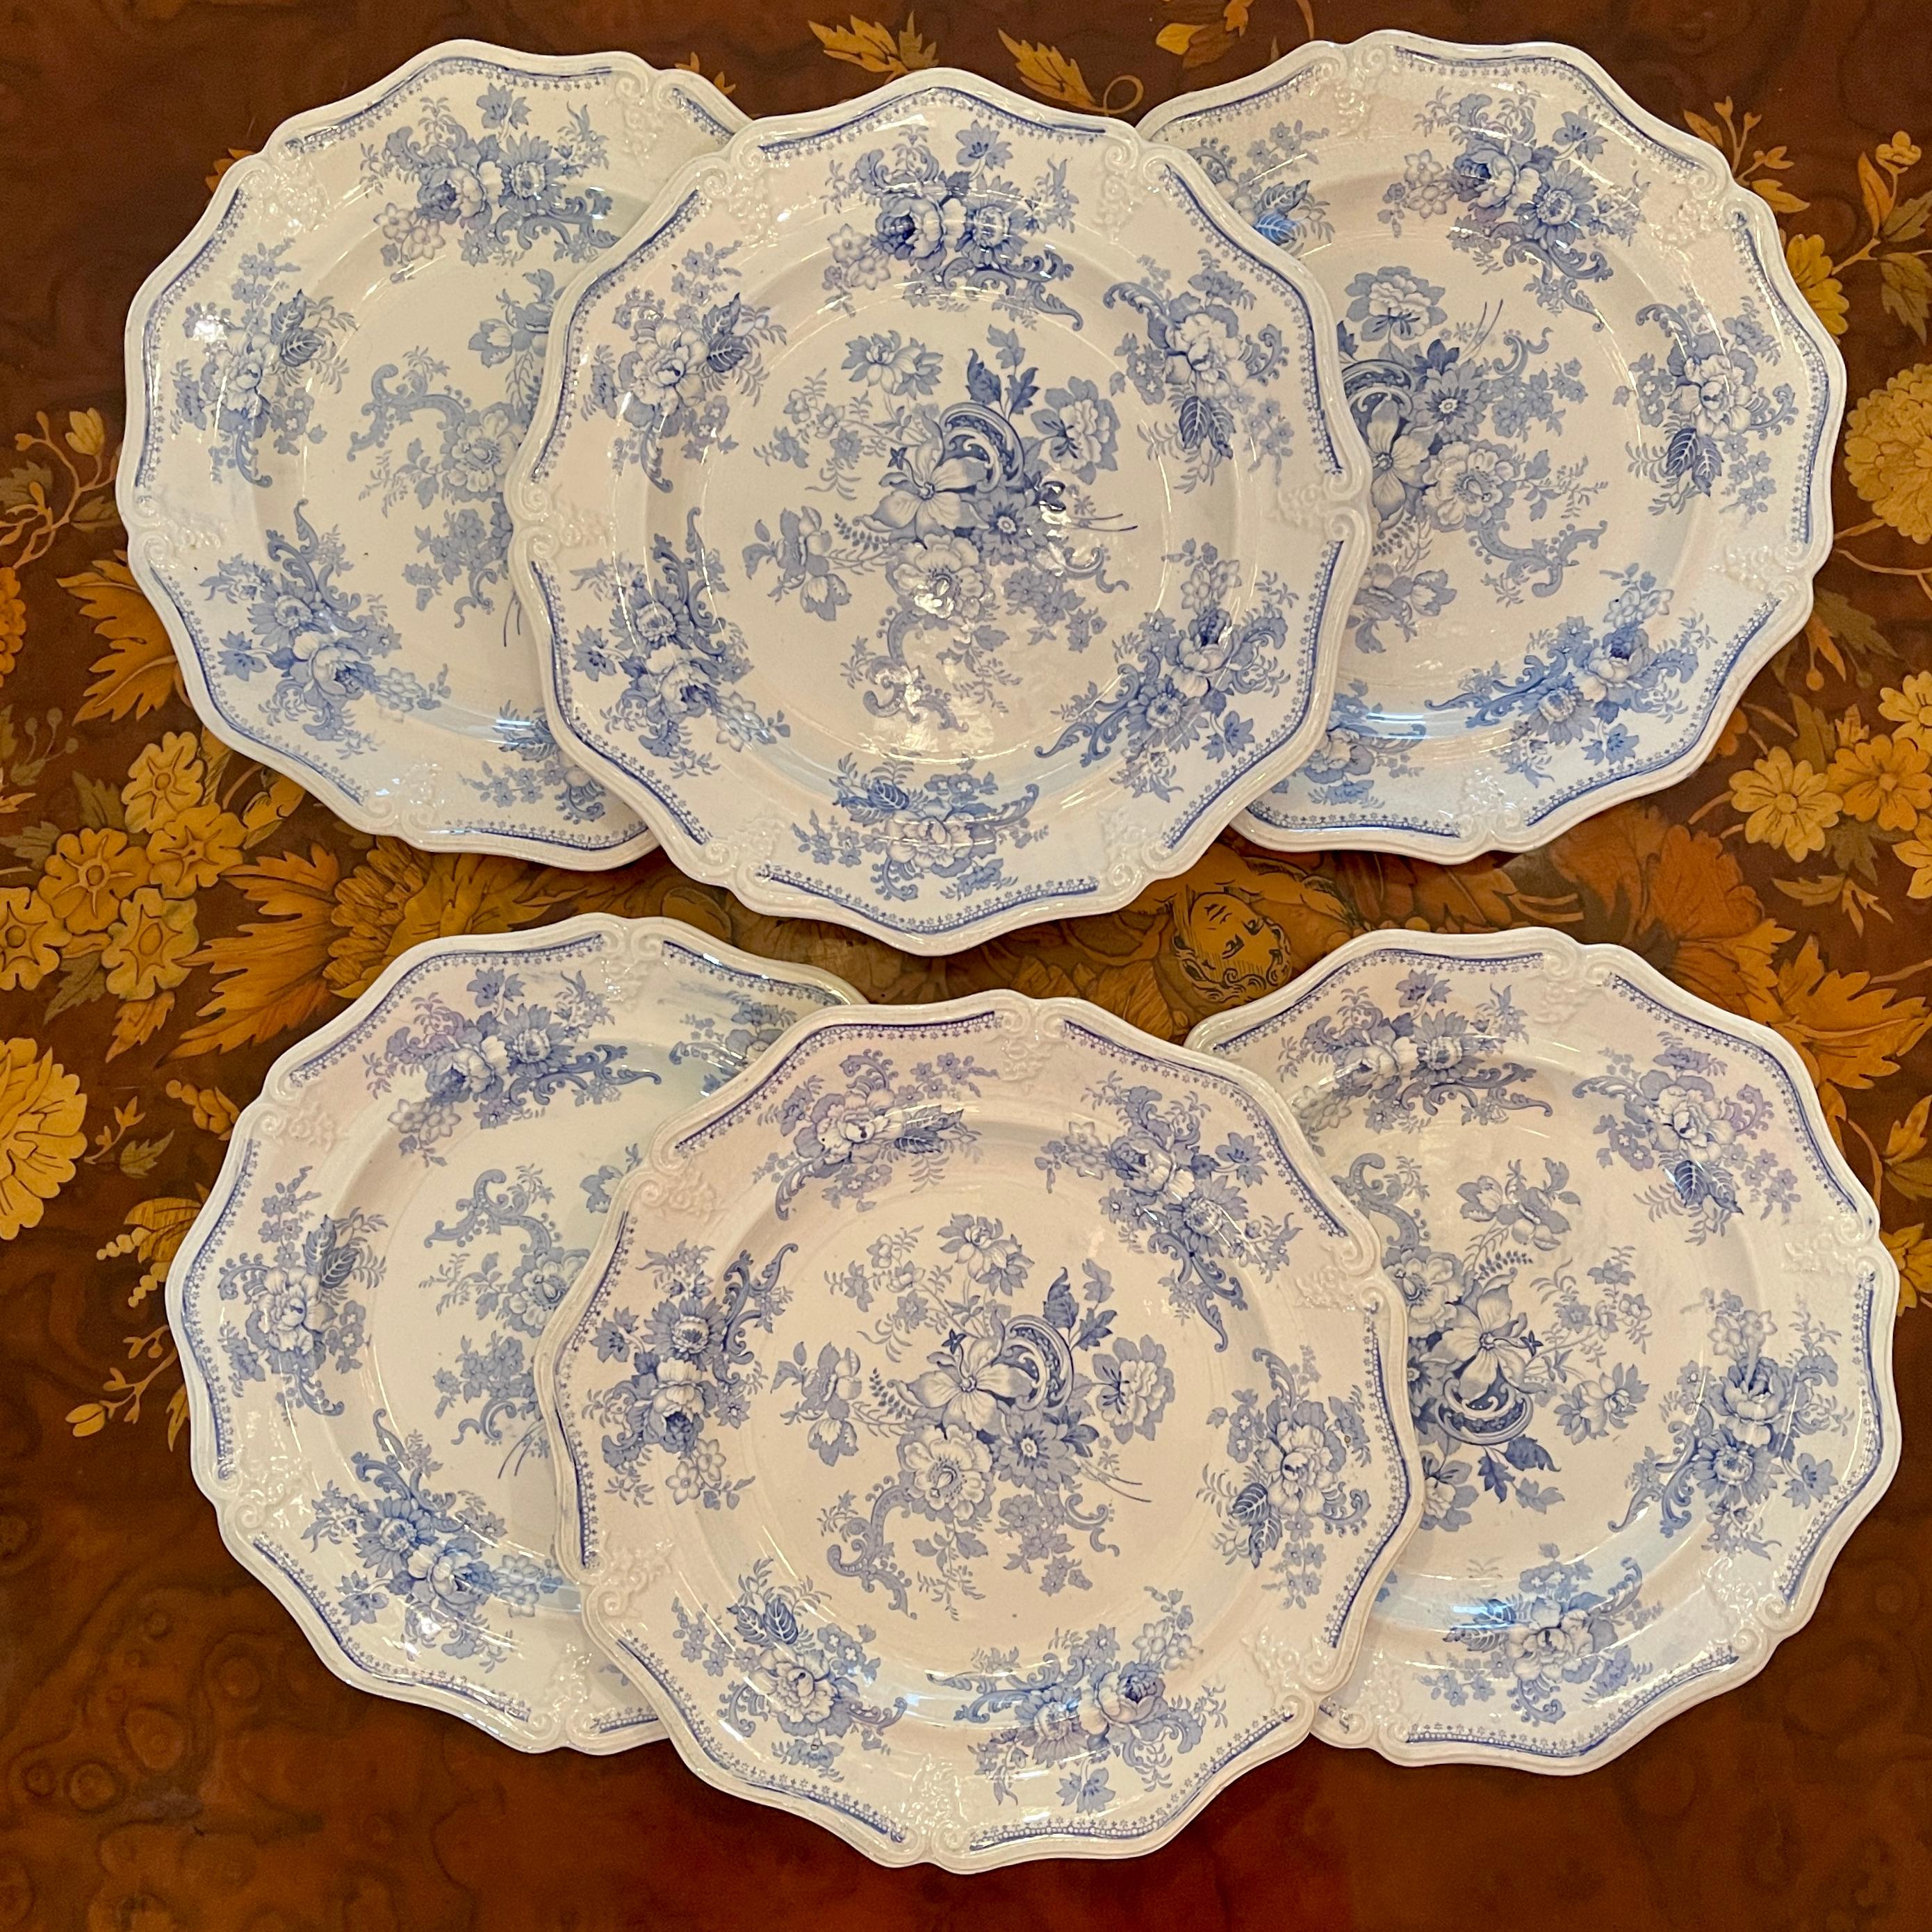 In the “Amaranthine Flowers” pattern, a set of six dinner plates, by Elijah Jones & Edward Walley – Hanley Cobridge Staffordshire, England - Circa 1841-1843.

A Stone China body, transfer printed in a romantic soft blue. A central bouquet of